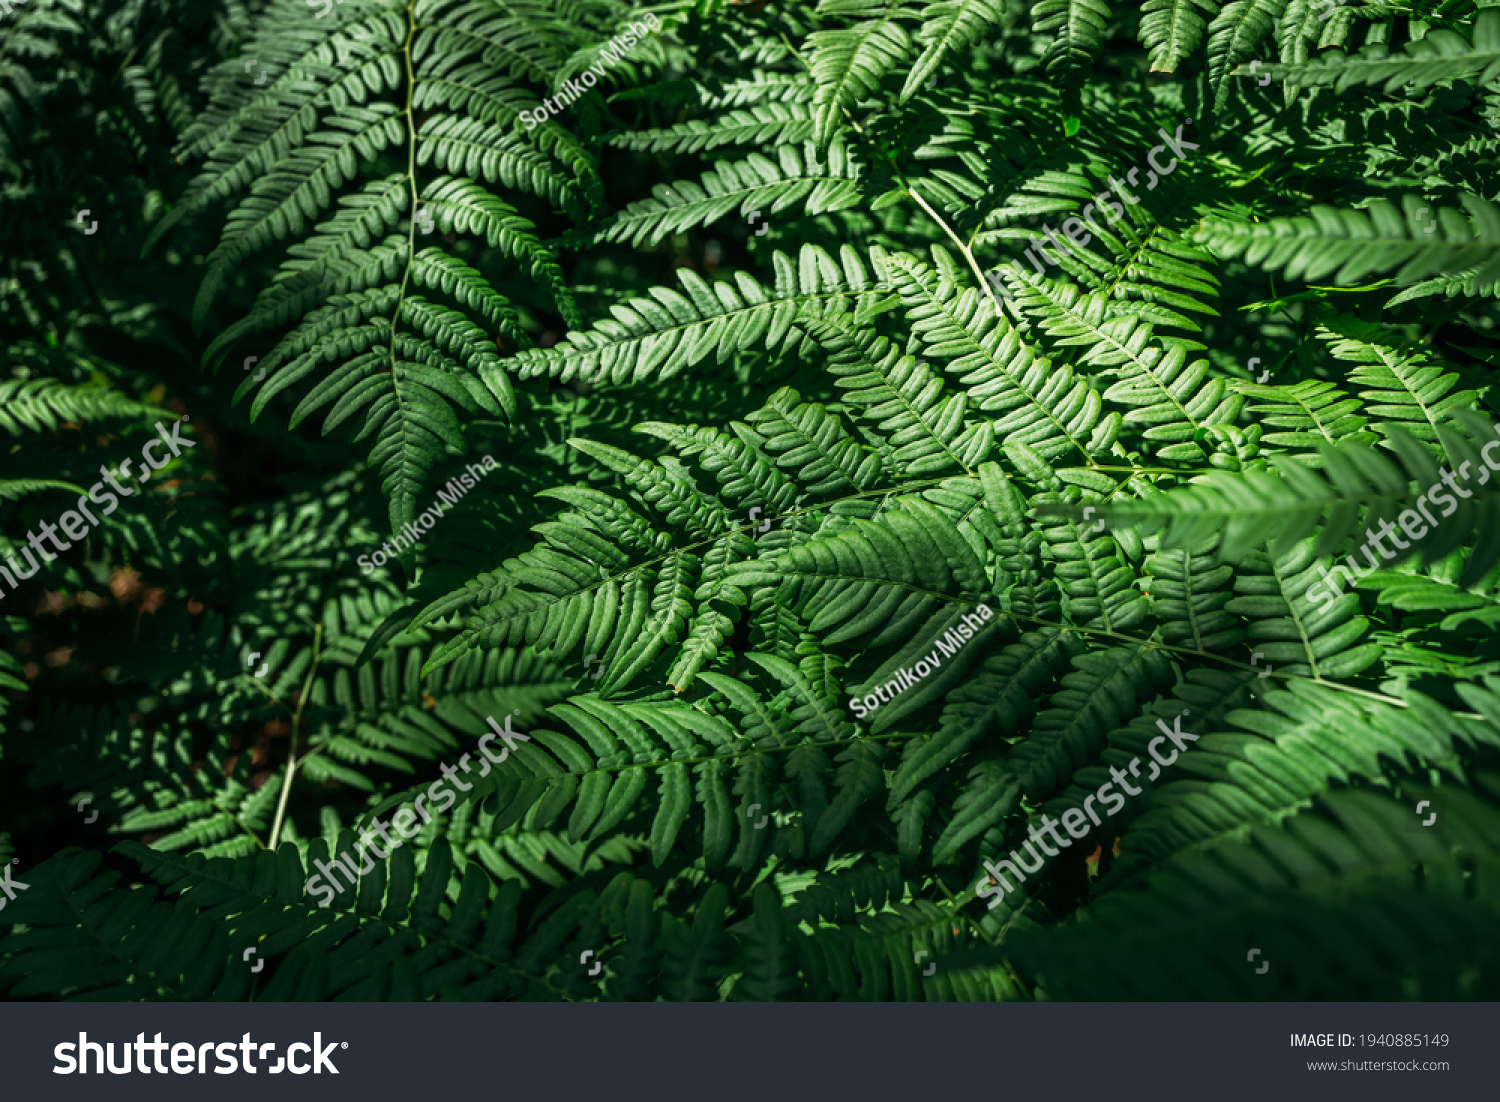 Summer green texture hundreds of ferns. Green fern tree growing in summer. Fern with green leaves on natural background. Natural floral fern background on a sunny day #1940885149